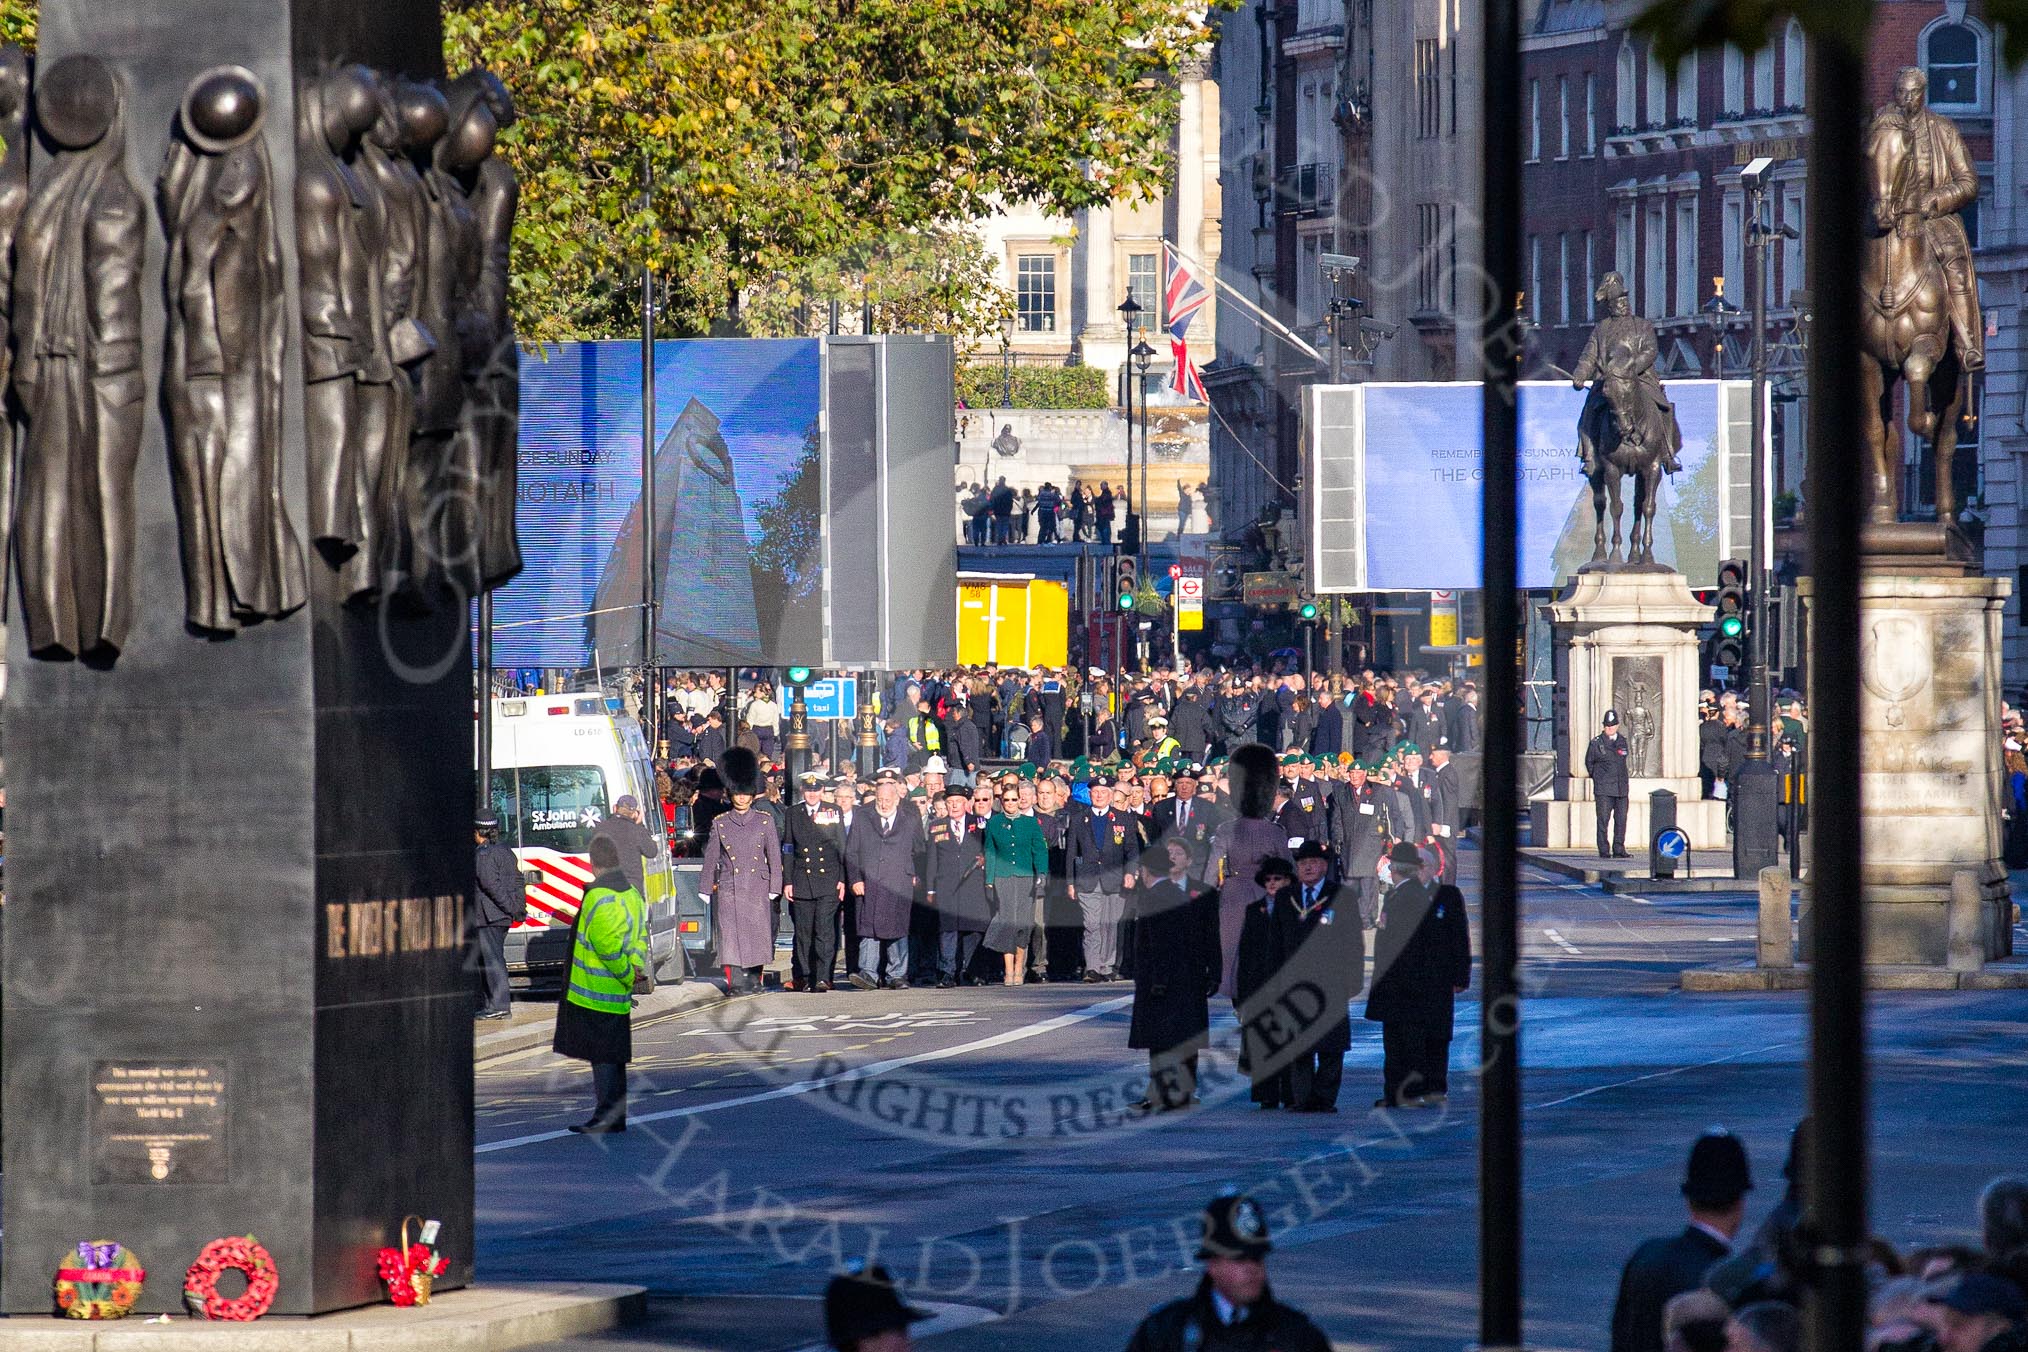 Columns of ex-Srevicemen and women, organized by the Royal British Legion, have assembled. On the left of the photo the Monument to the Women of World War II, on the right the Prince George, Duke of Cambridge  Statue, and on the very right the Statue of George, Duke of Clarence.